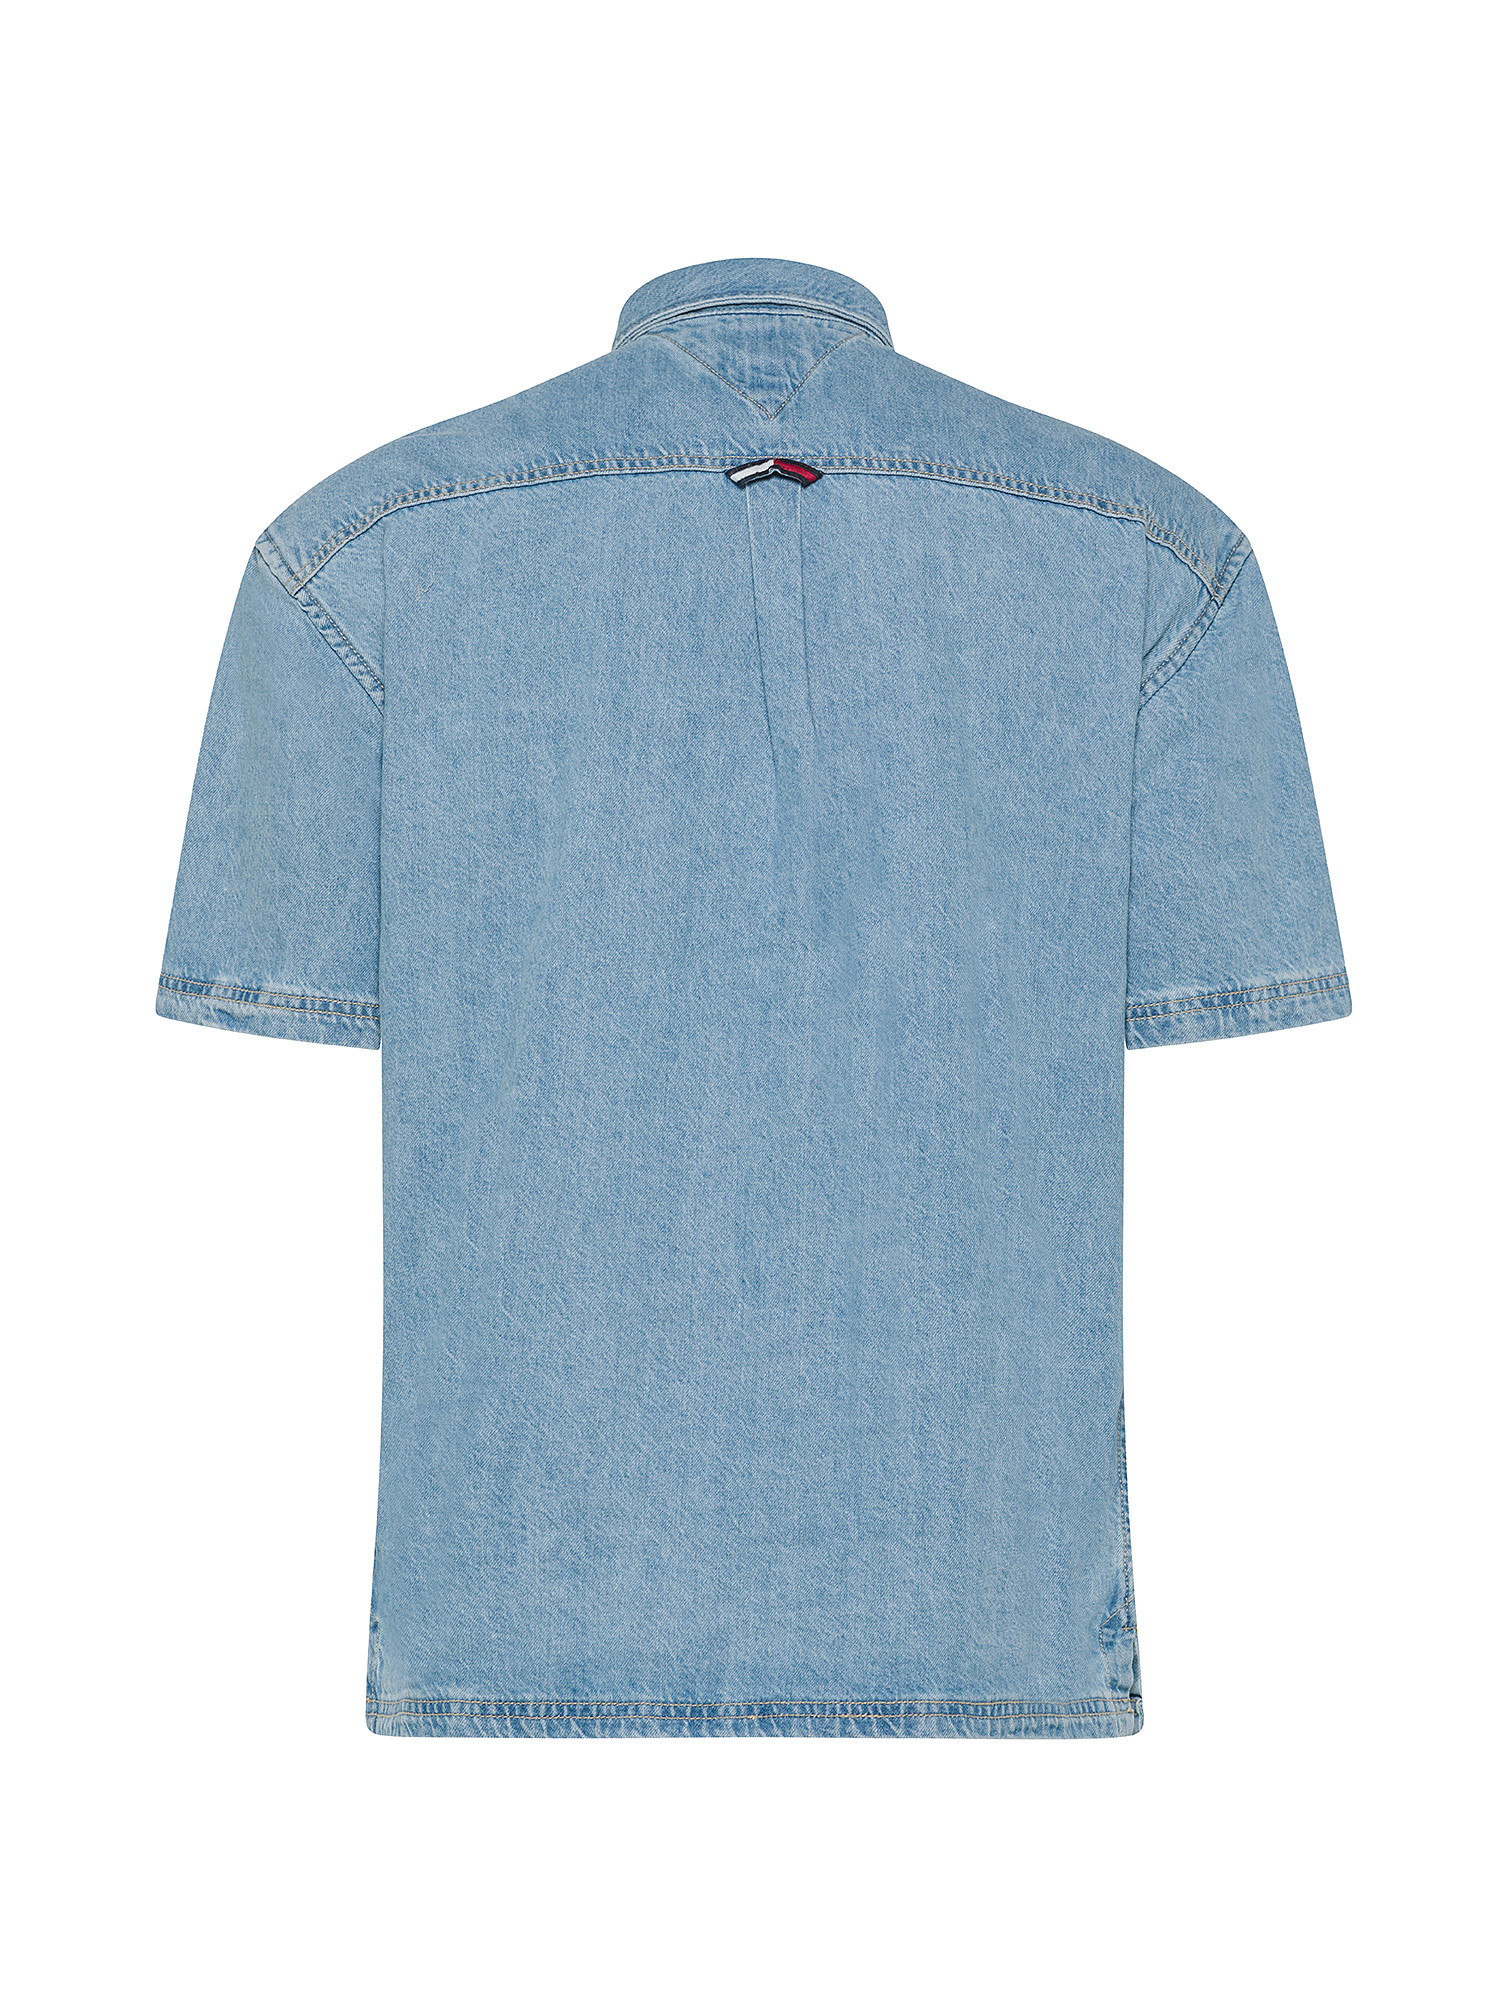 Tommy Jeans - Cotton shirt with logo, Denim, large image number 1